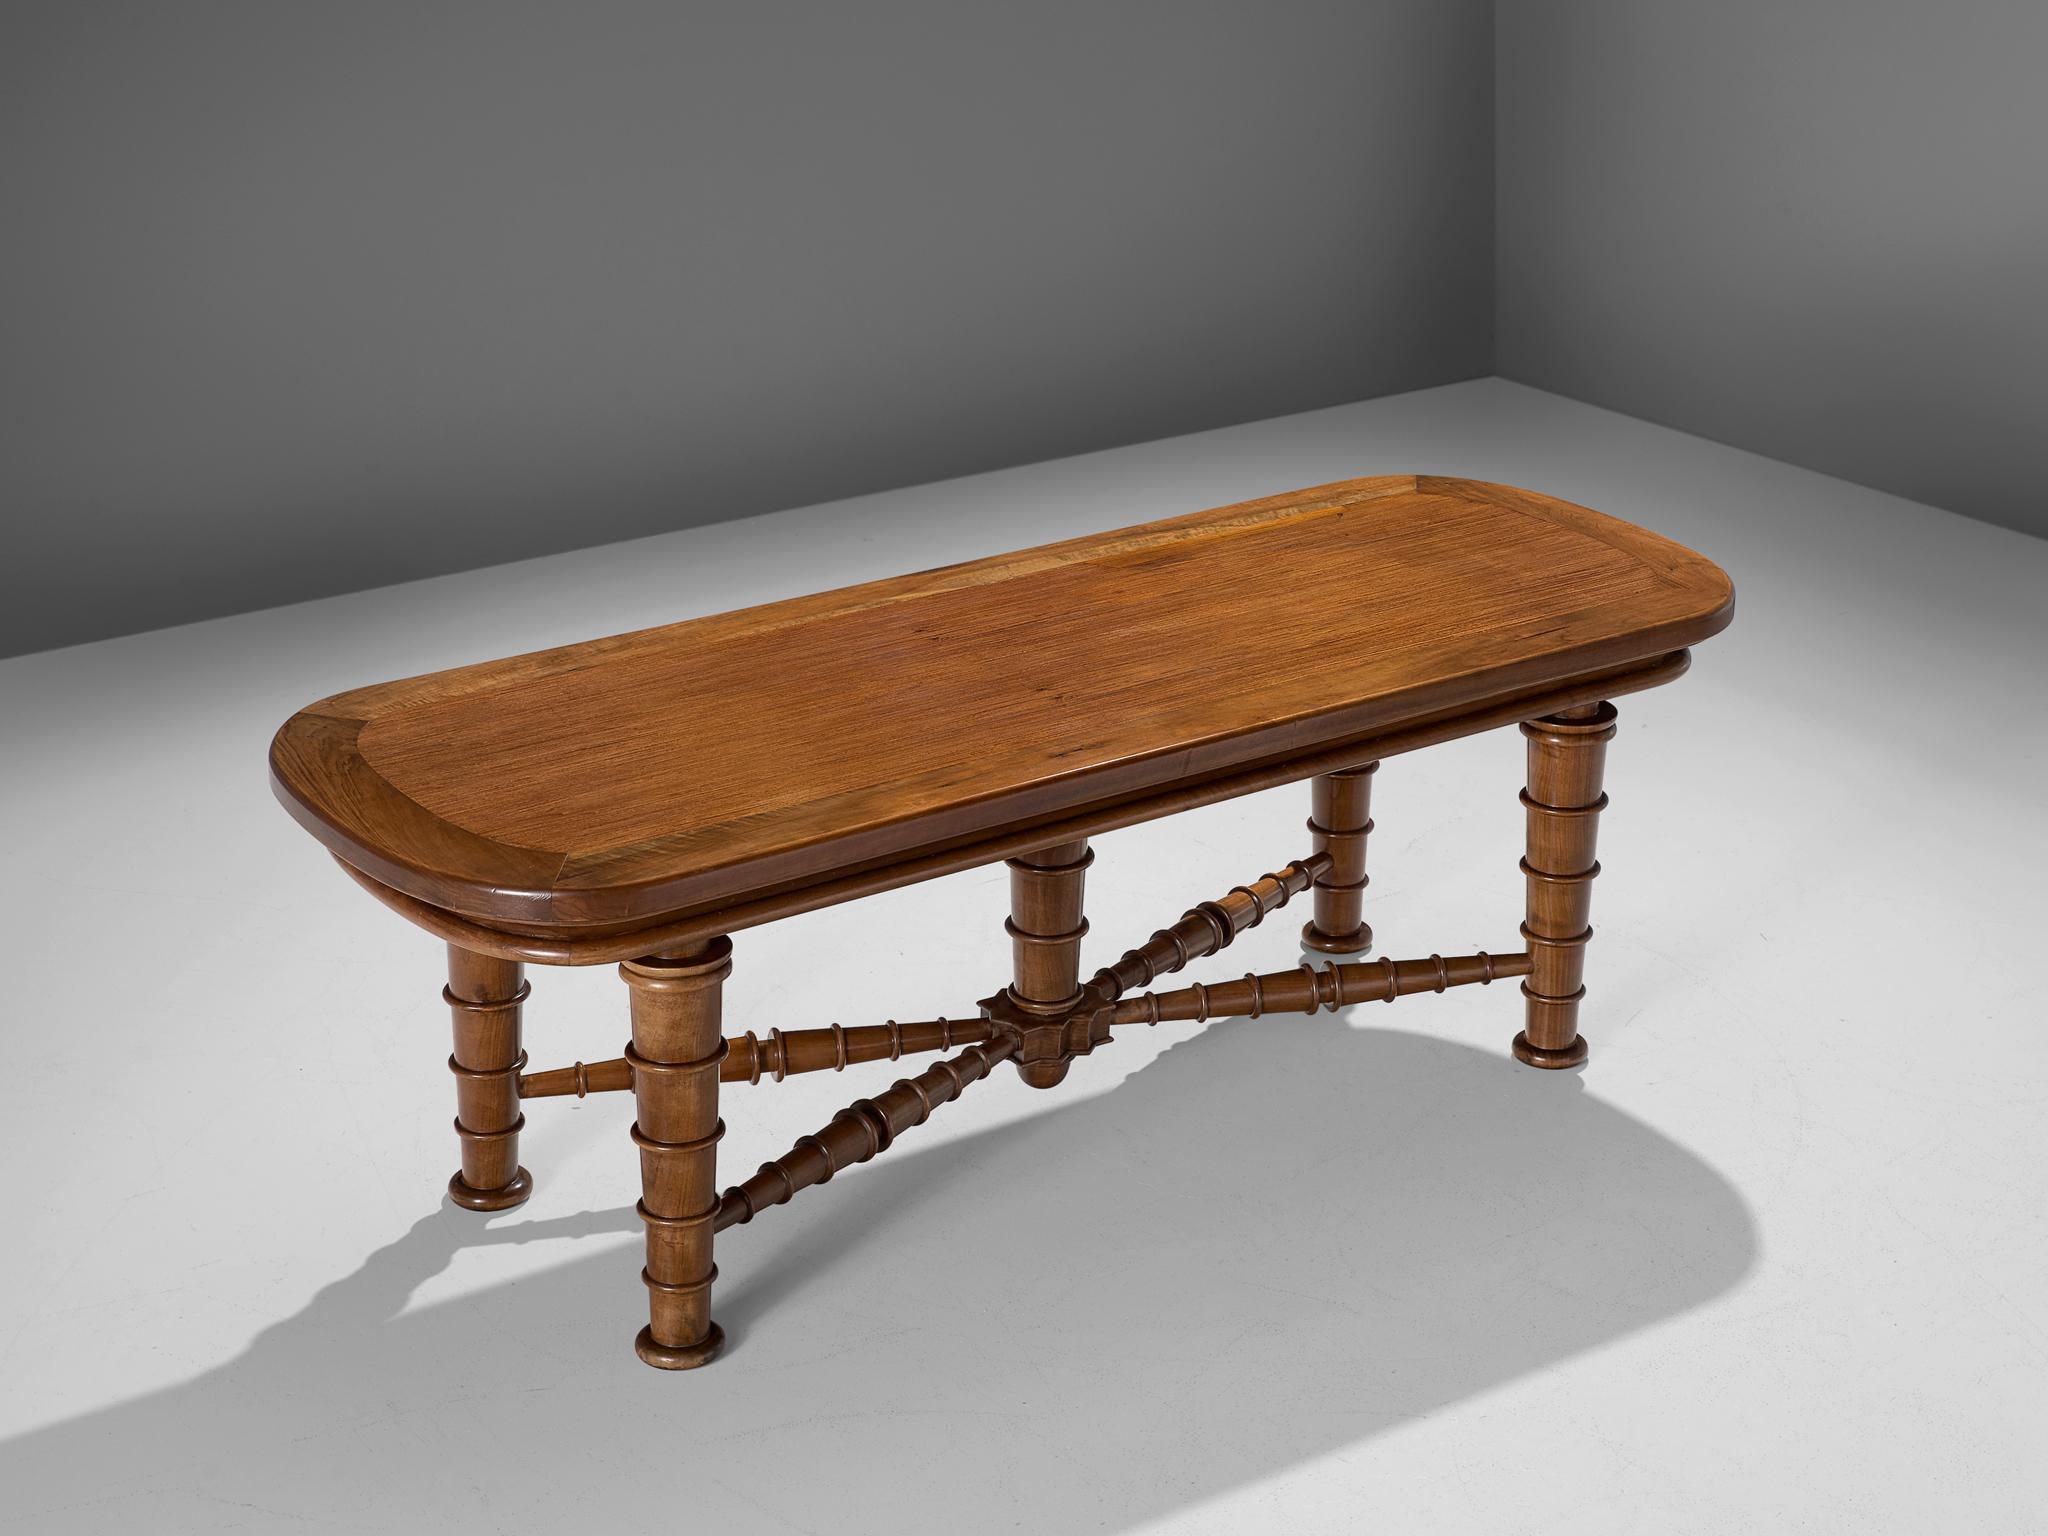 Dining table, walnut, Italy, 1940s.

This Italian dining table has a rectangular top with rounded corners and a detailed cross-section. The top is framed which highlights the veneered top. Remarkable about this table are the legs. Four legs lift the